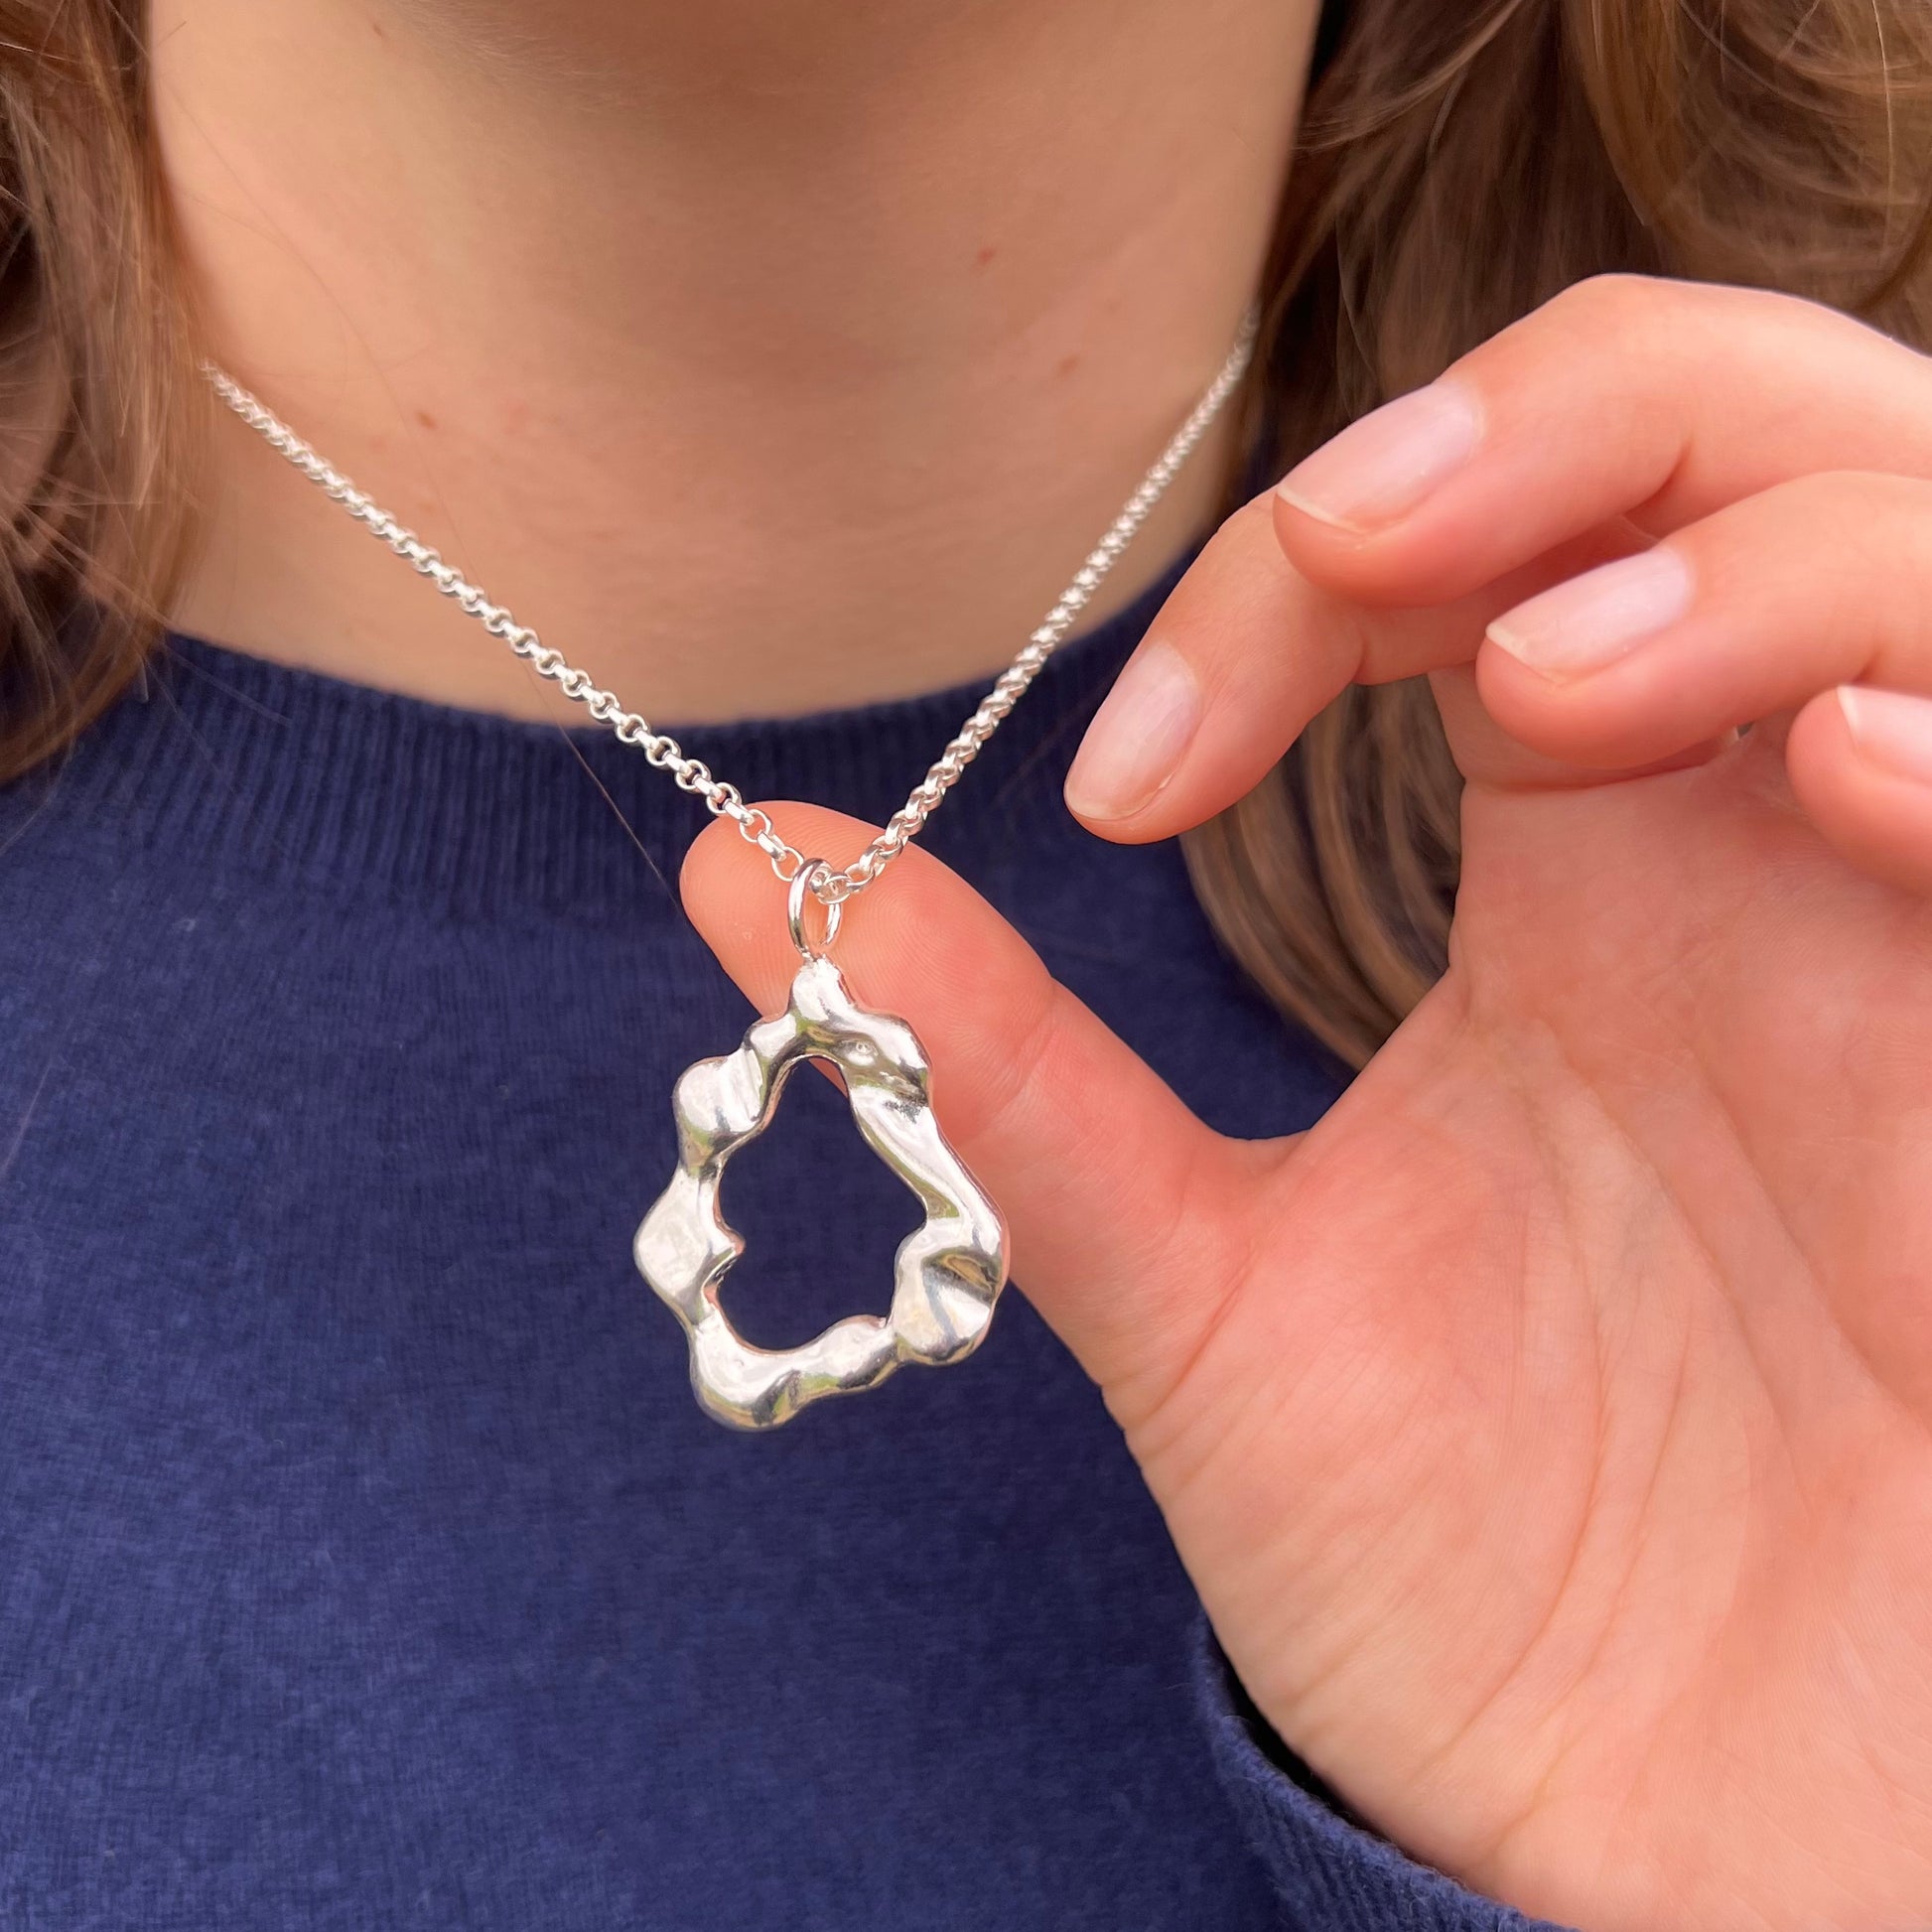 The 'Mist pendant'. A handmade, sterling silver abstract shaped pendant on a belcher chain. The necklace is pictured on a woman with a blue jumper on.